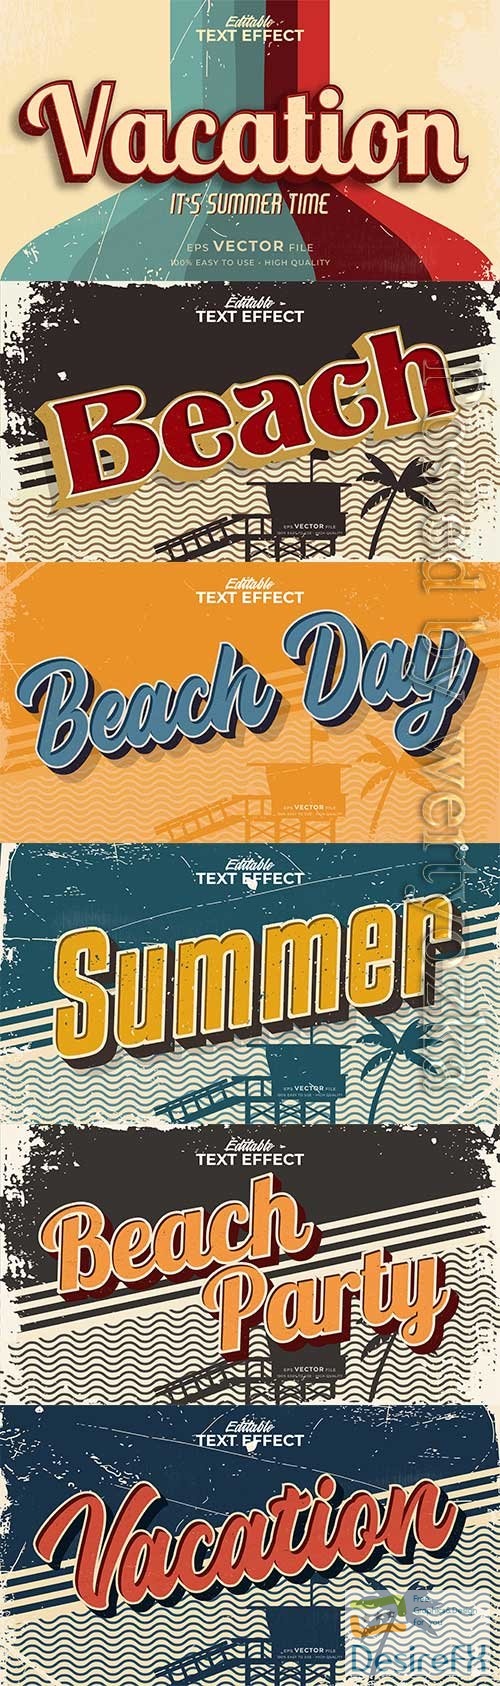 Retro summer holiday text in grunge style theme in vector vol 8